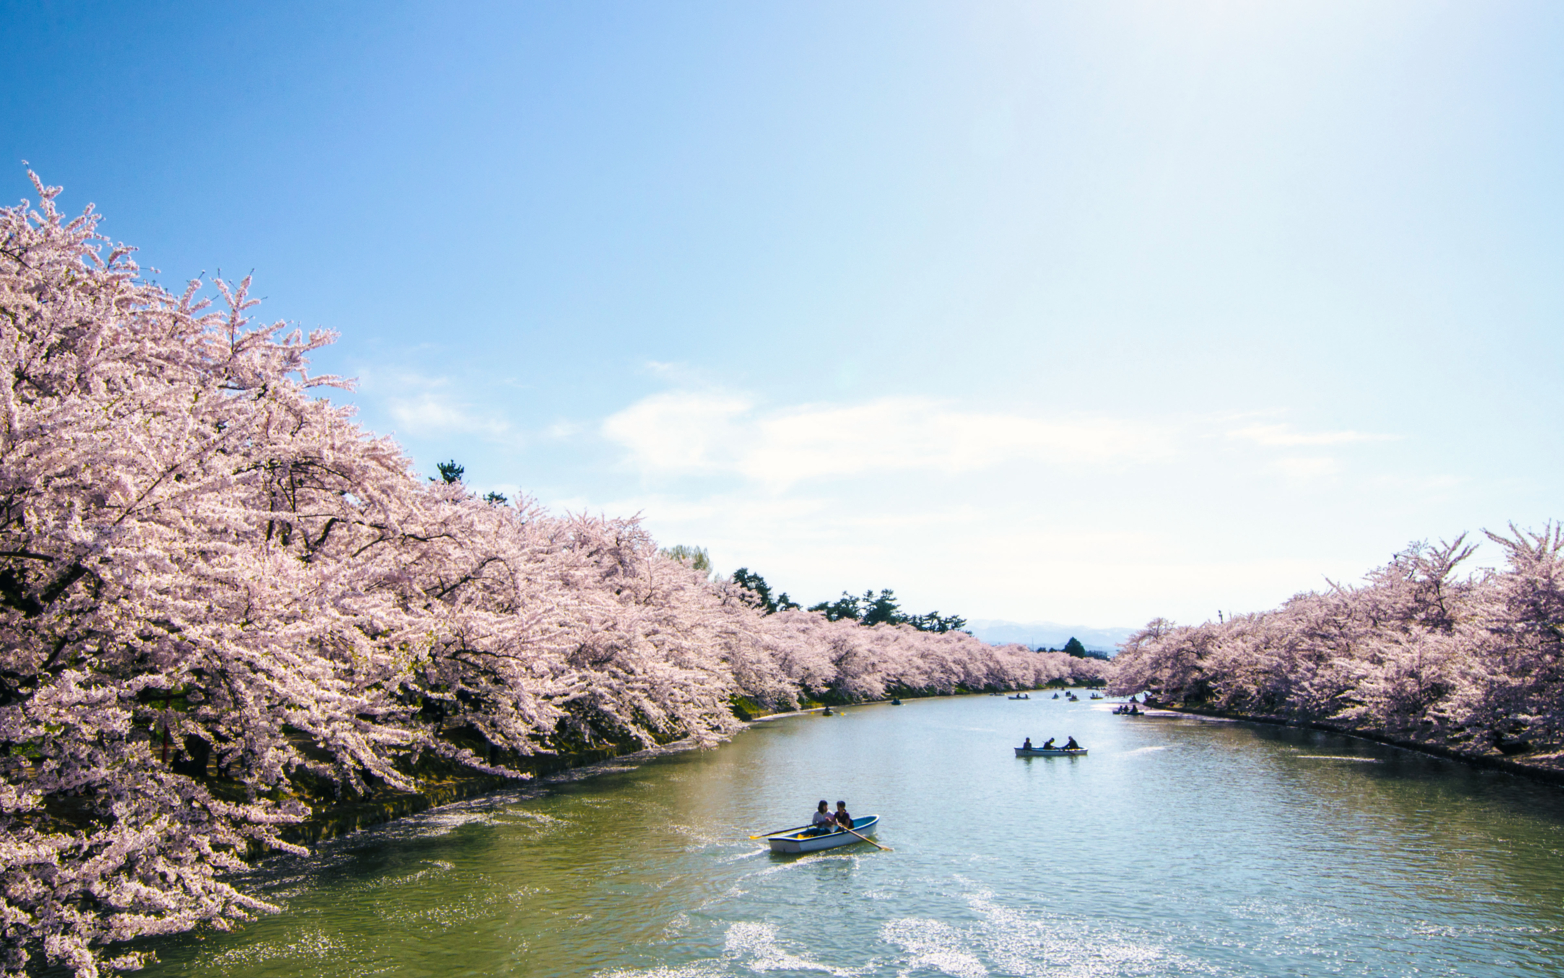 Sakura and Sport: The Enchanting Tale of the Japan Cherry Blossom